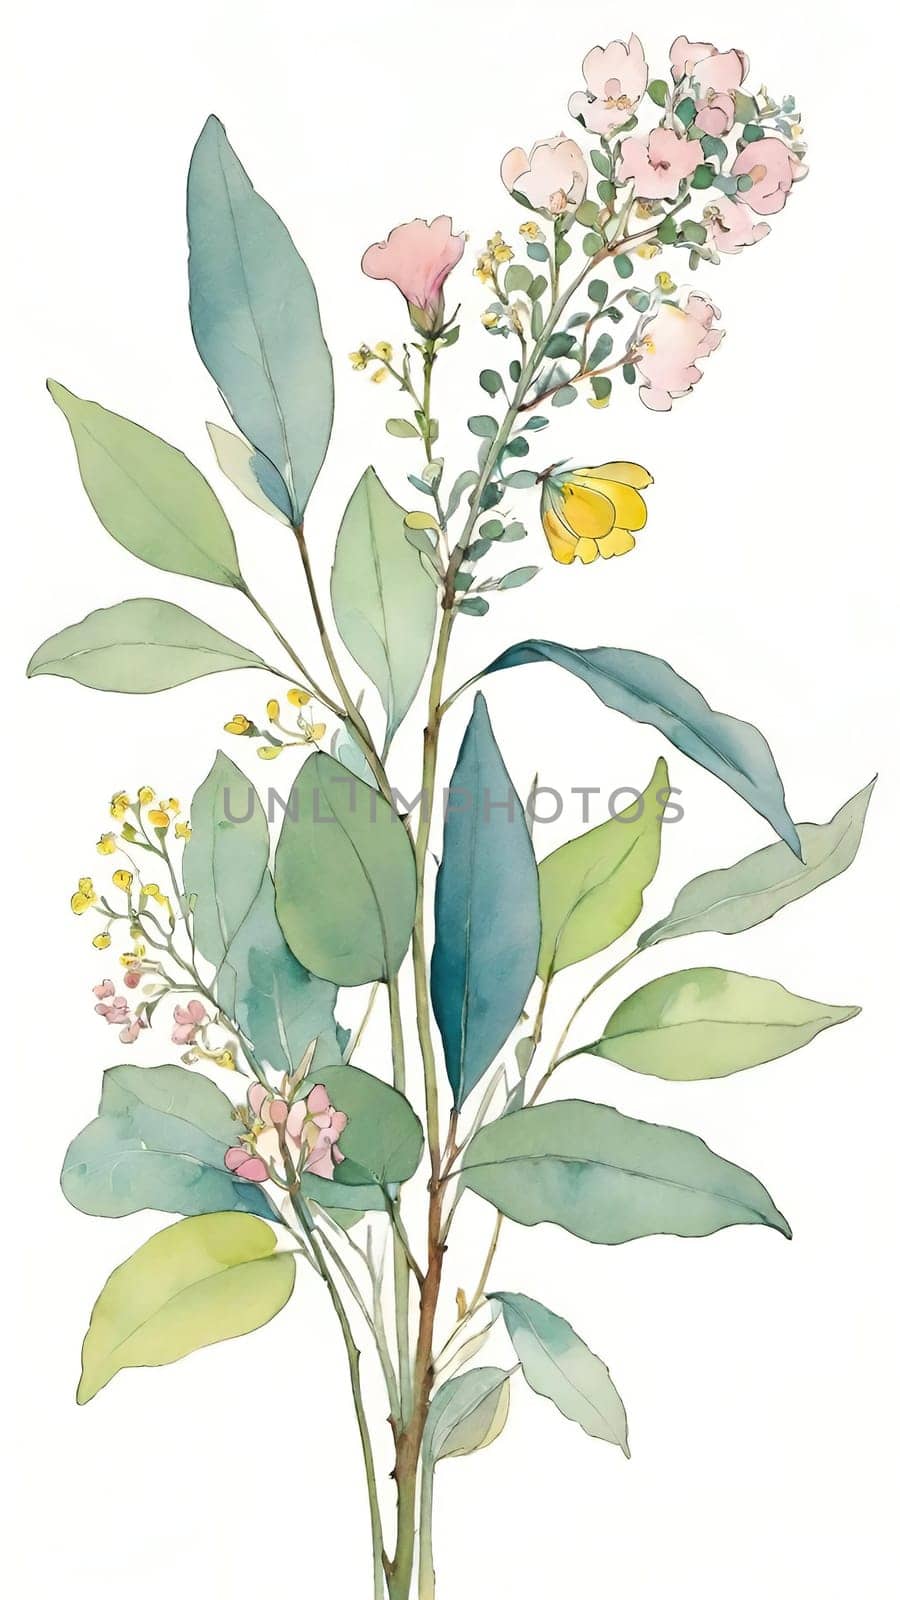 Watercolor illustration of wildflowers and eucalyptus branches. by yilmazsavaskandag